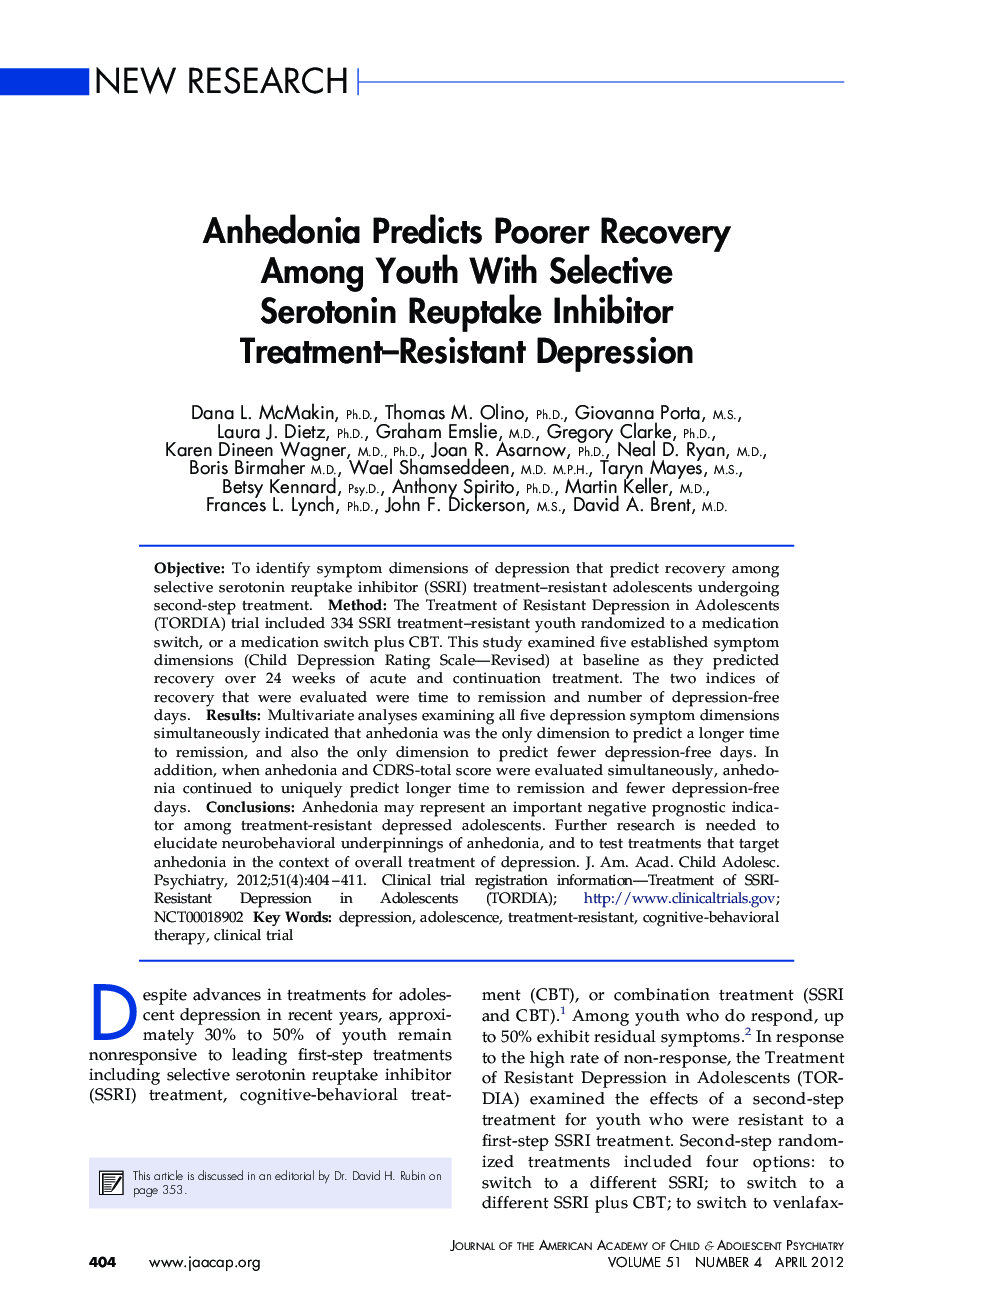 Anhedonia Predicts Poorer Recovery Among Youth With Selective Serotonin Reuptake Inhibitor Treatment–Resistant Depression 